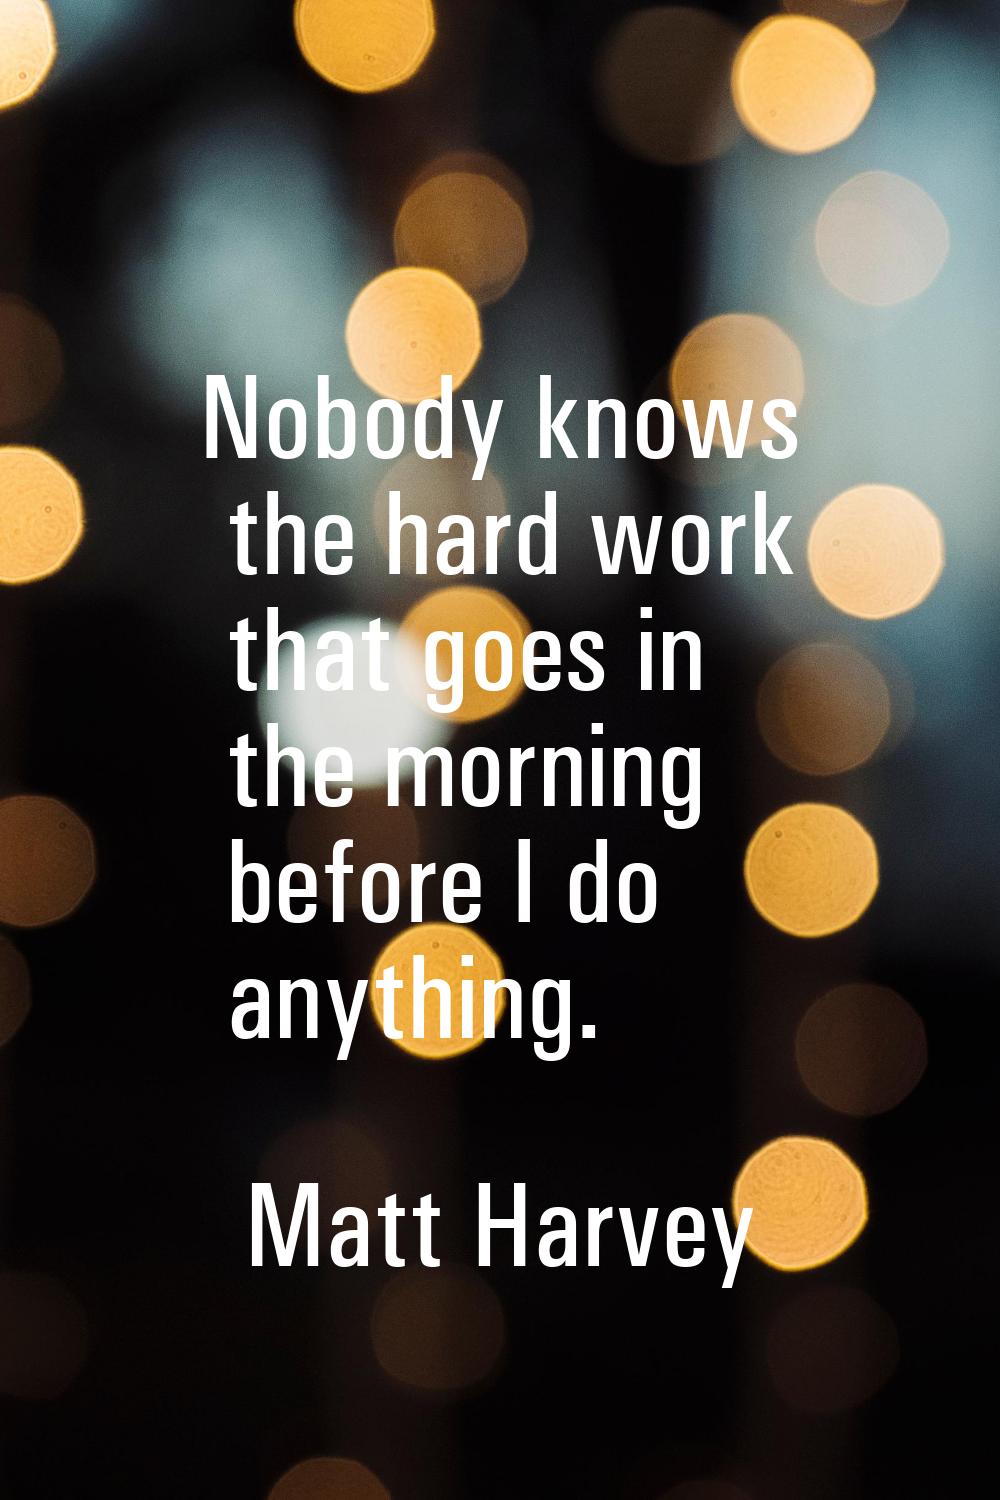 Nobody knows the hard work that goes in the morning before I do anything.